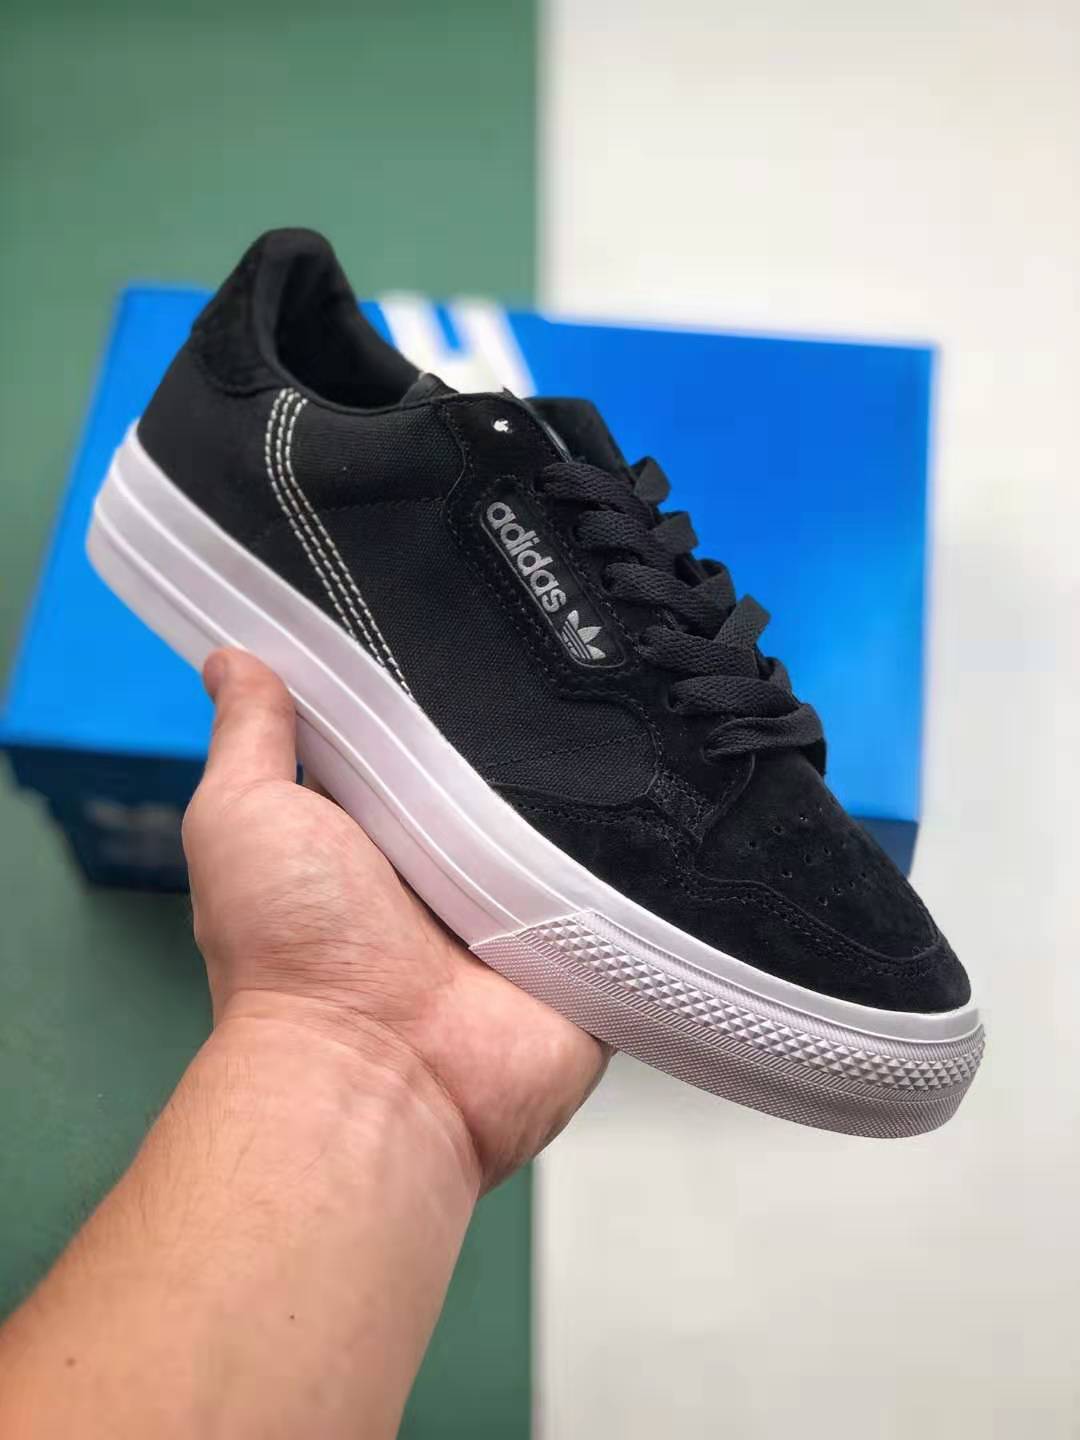 Adidas Continental Vulc Core Black EF3524 - Classic Style & Exceptional Performance